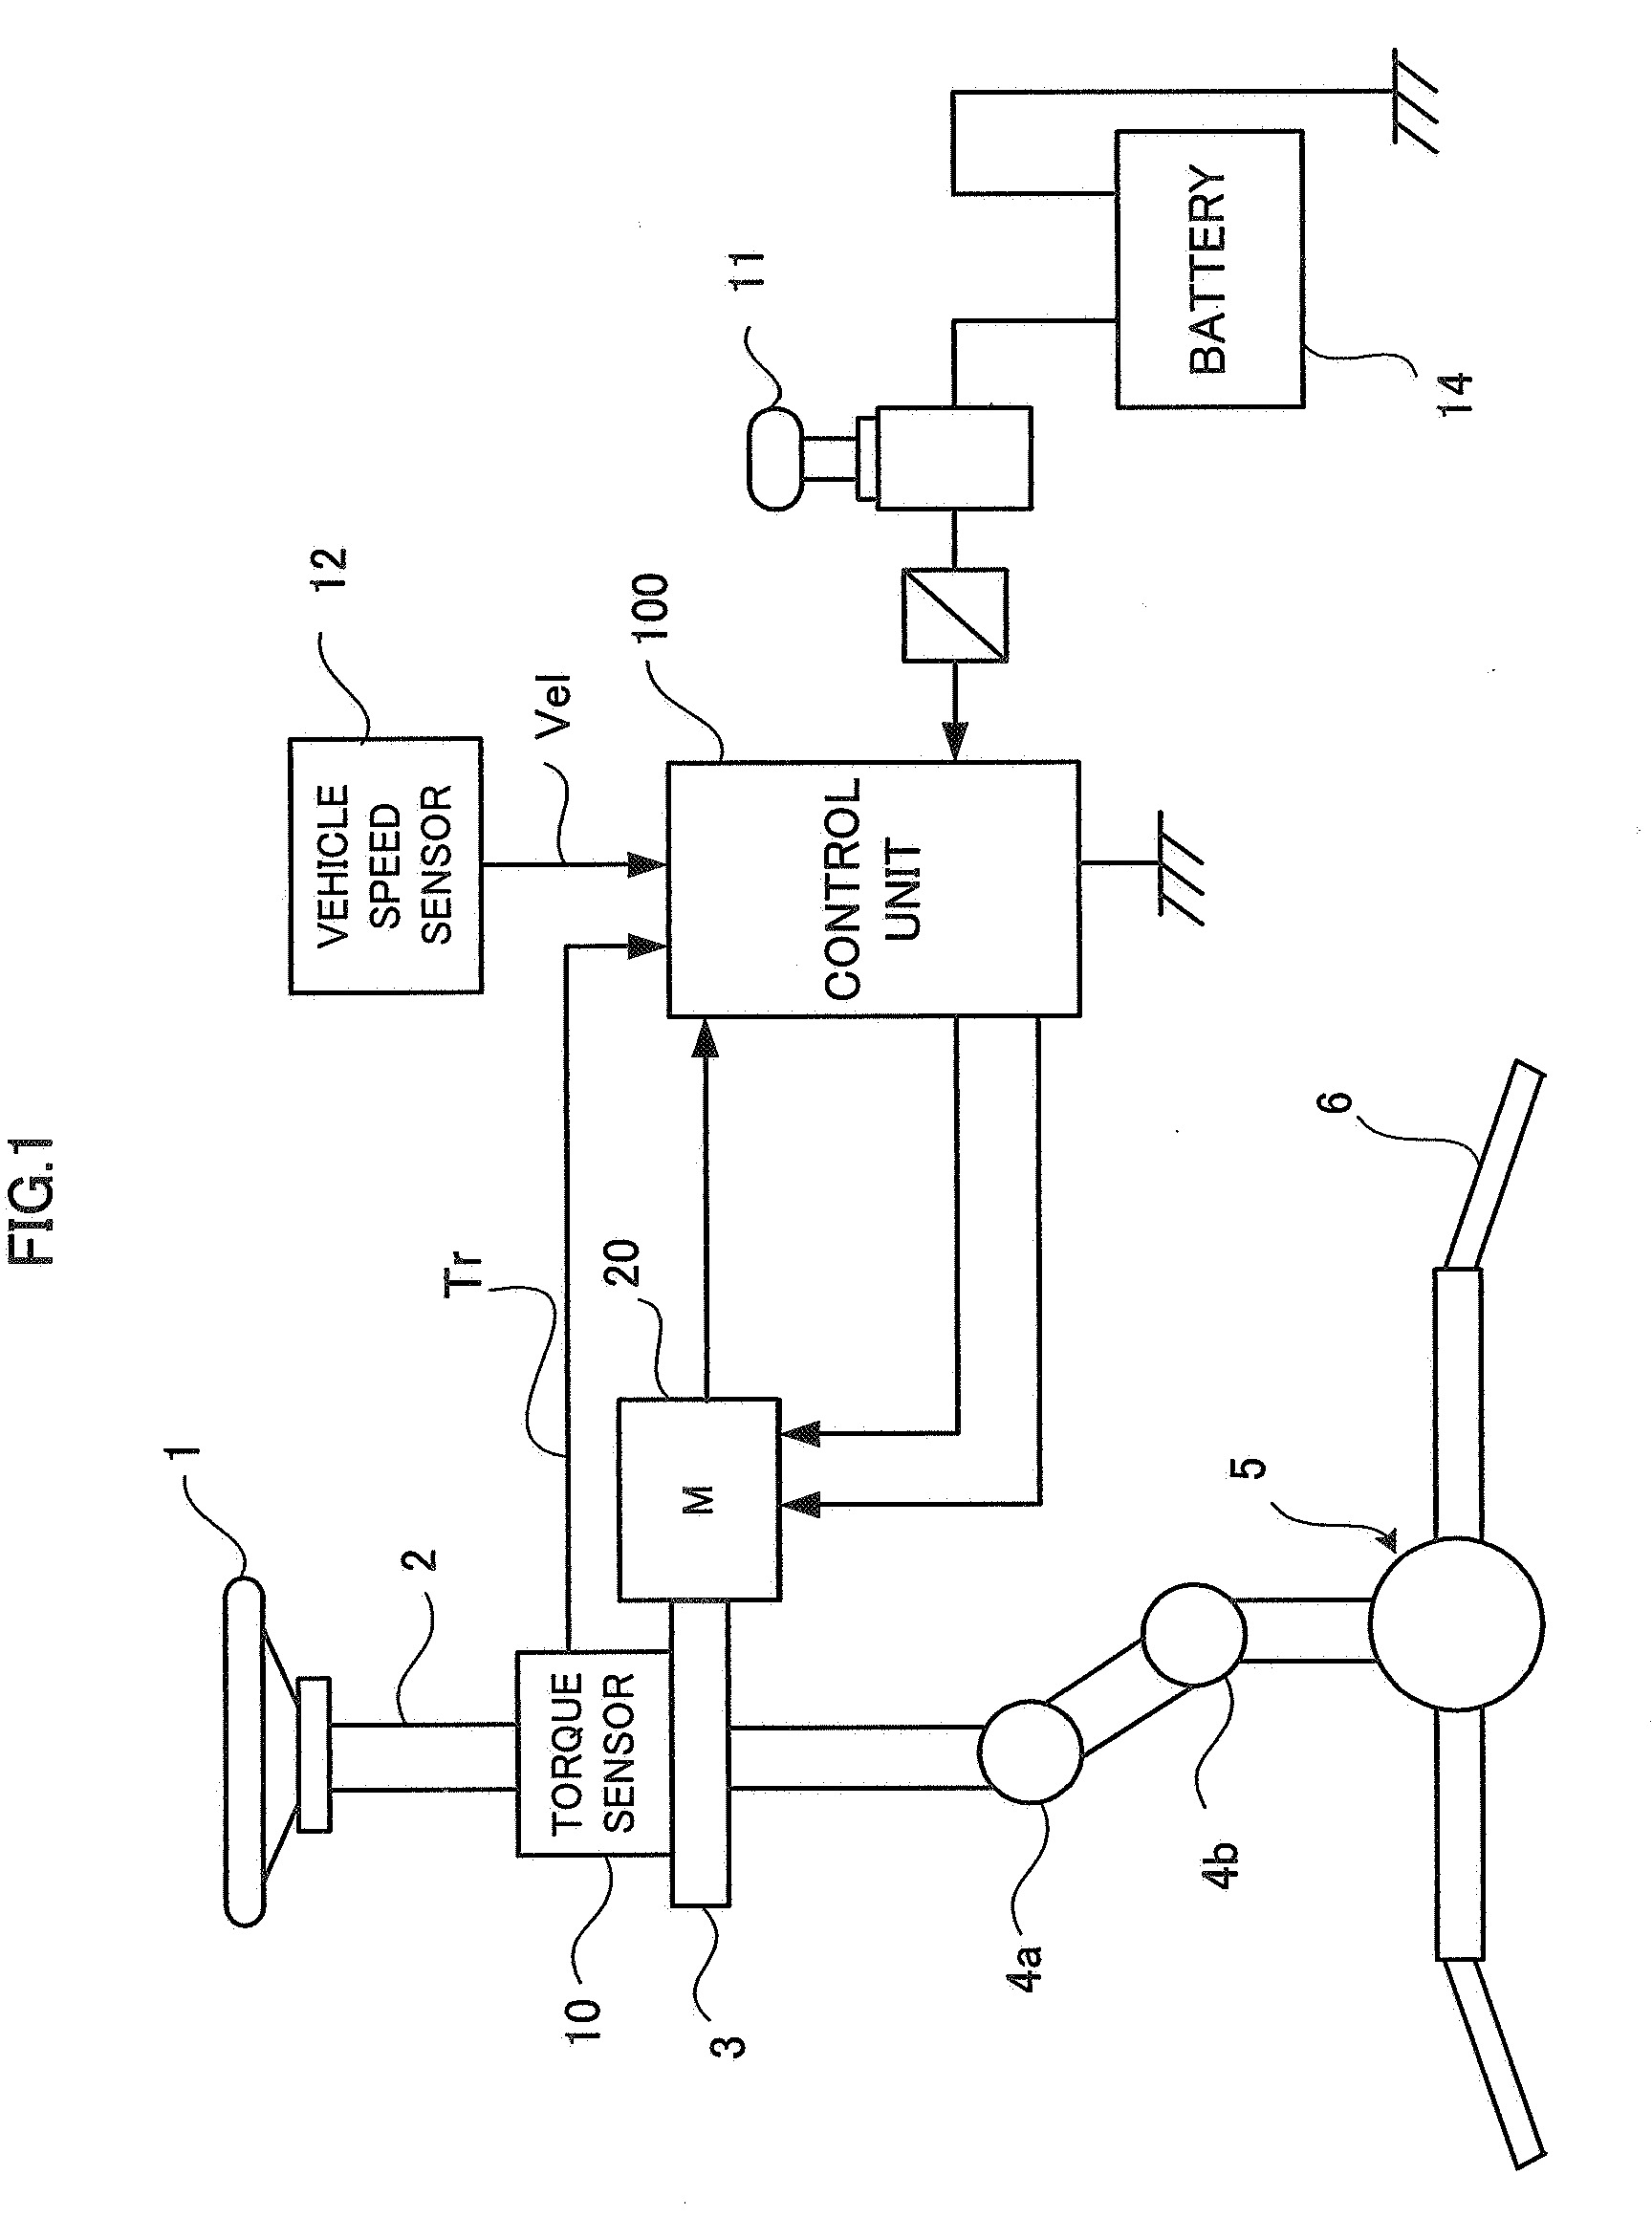 Control apparatus for electric power steering apparatus